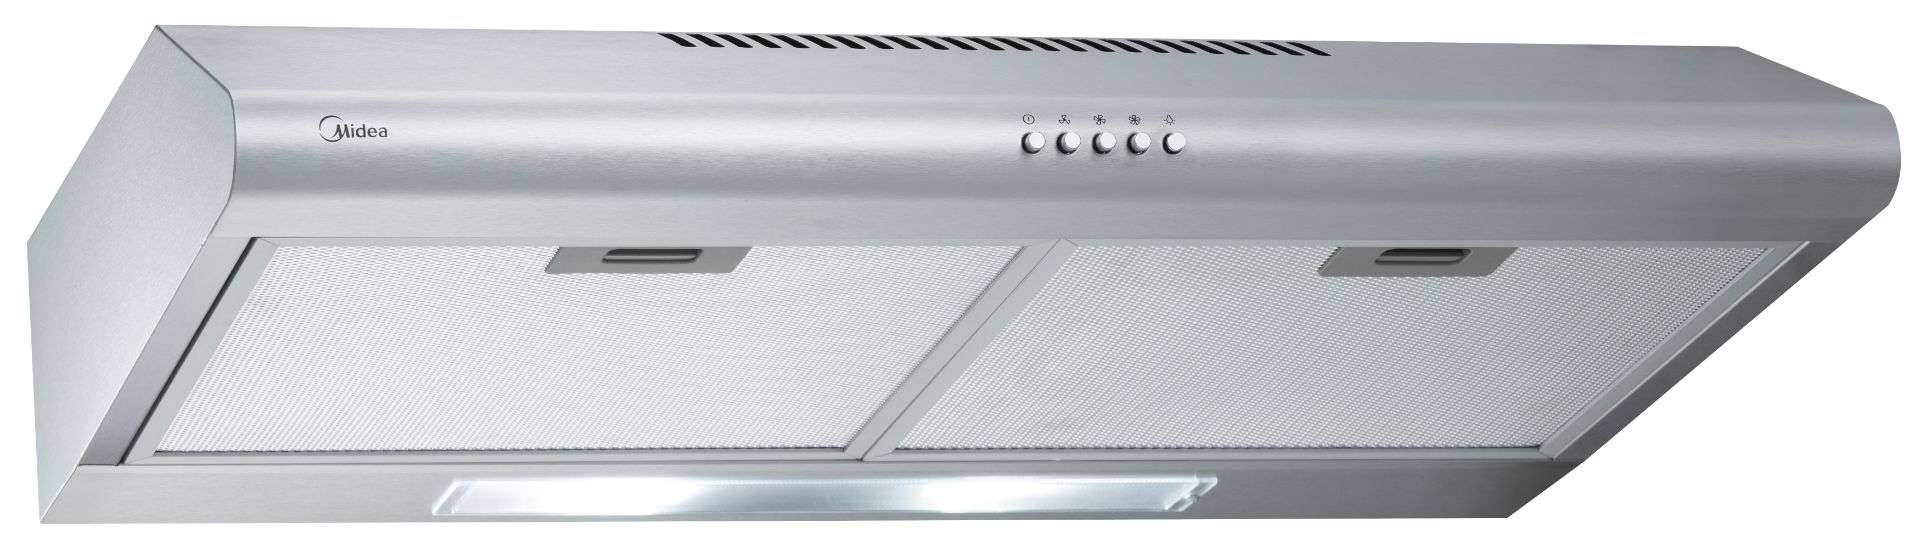 900m3/hr Slim Cooker Hood - MCH-76MSS (Duct Out) Recirculation